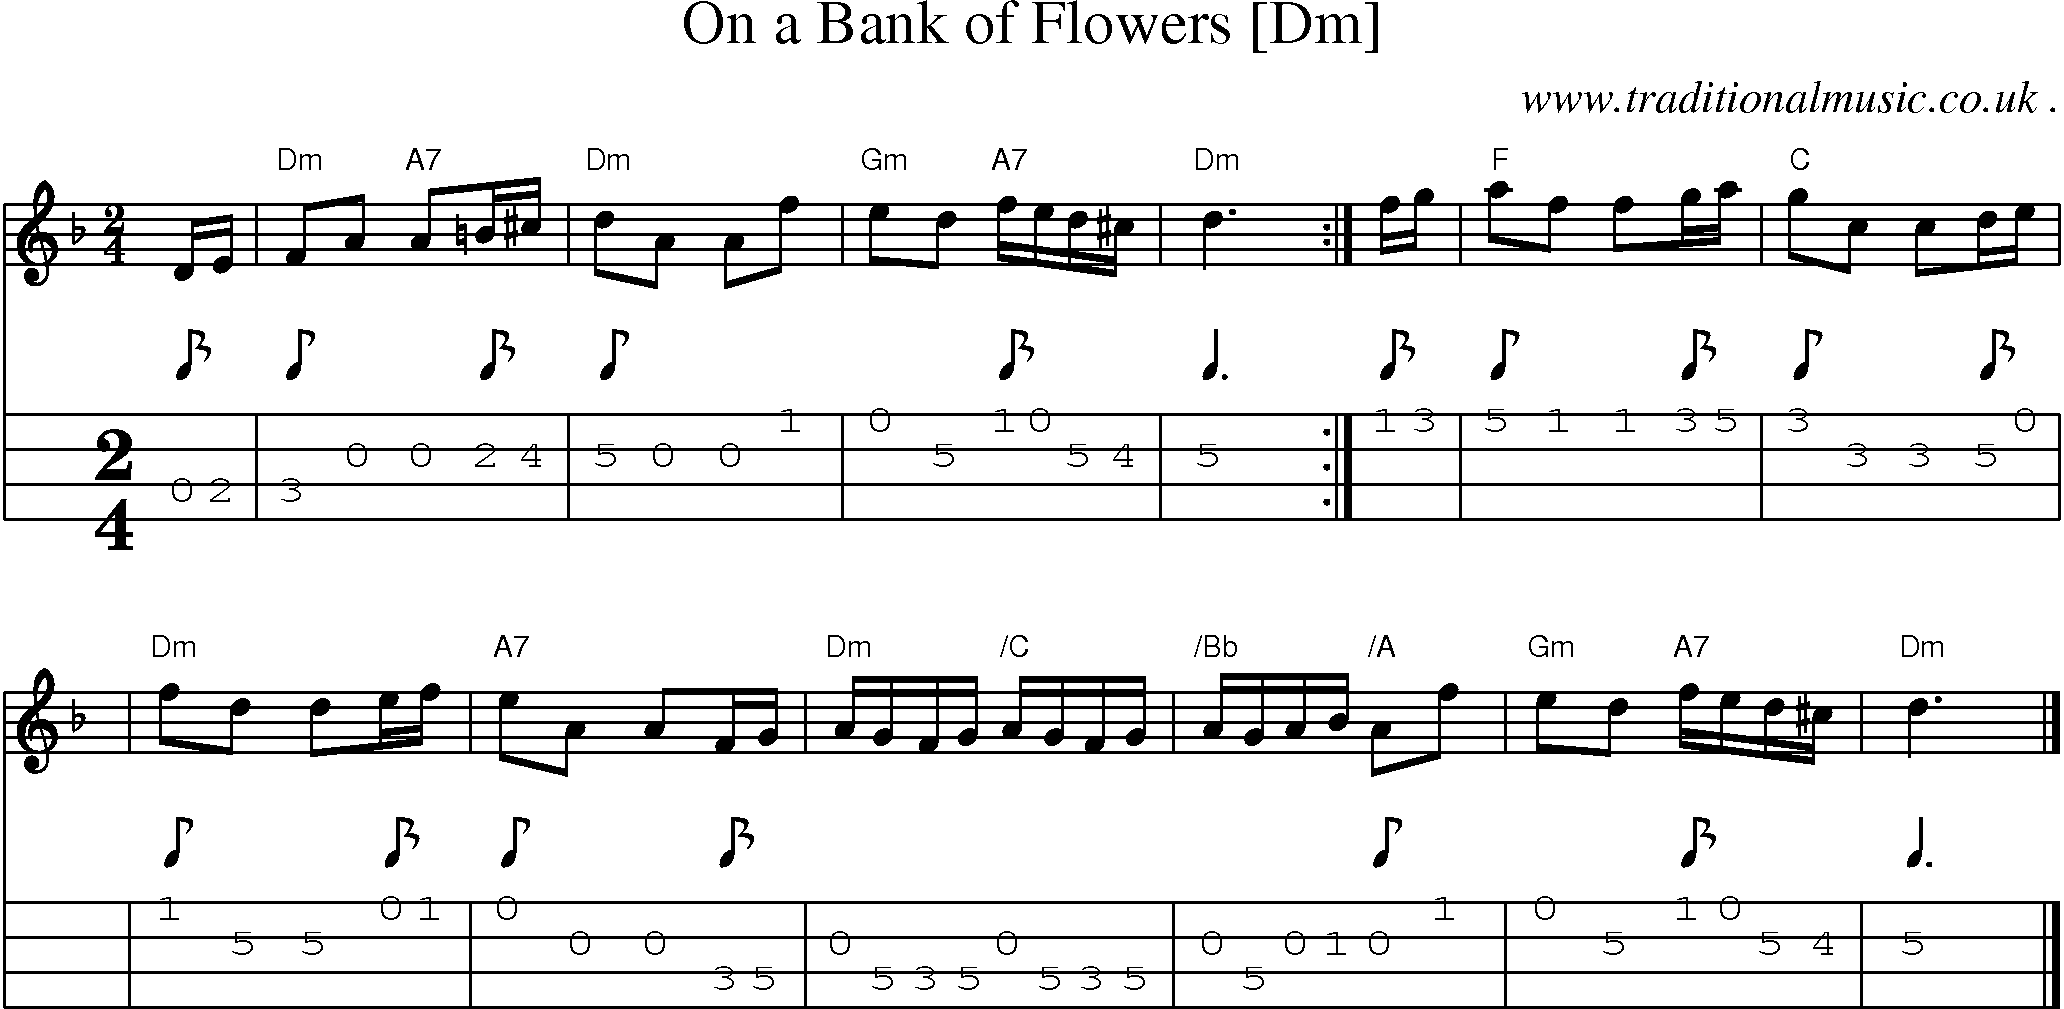 Sheet-music  score, Chords and Mandolin Tabs for On A Bank Of Flowers [dm]